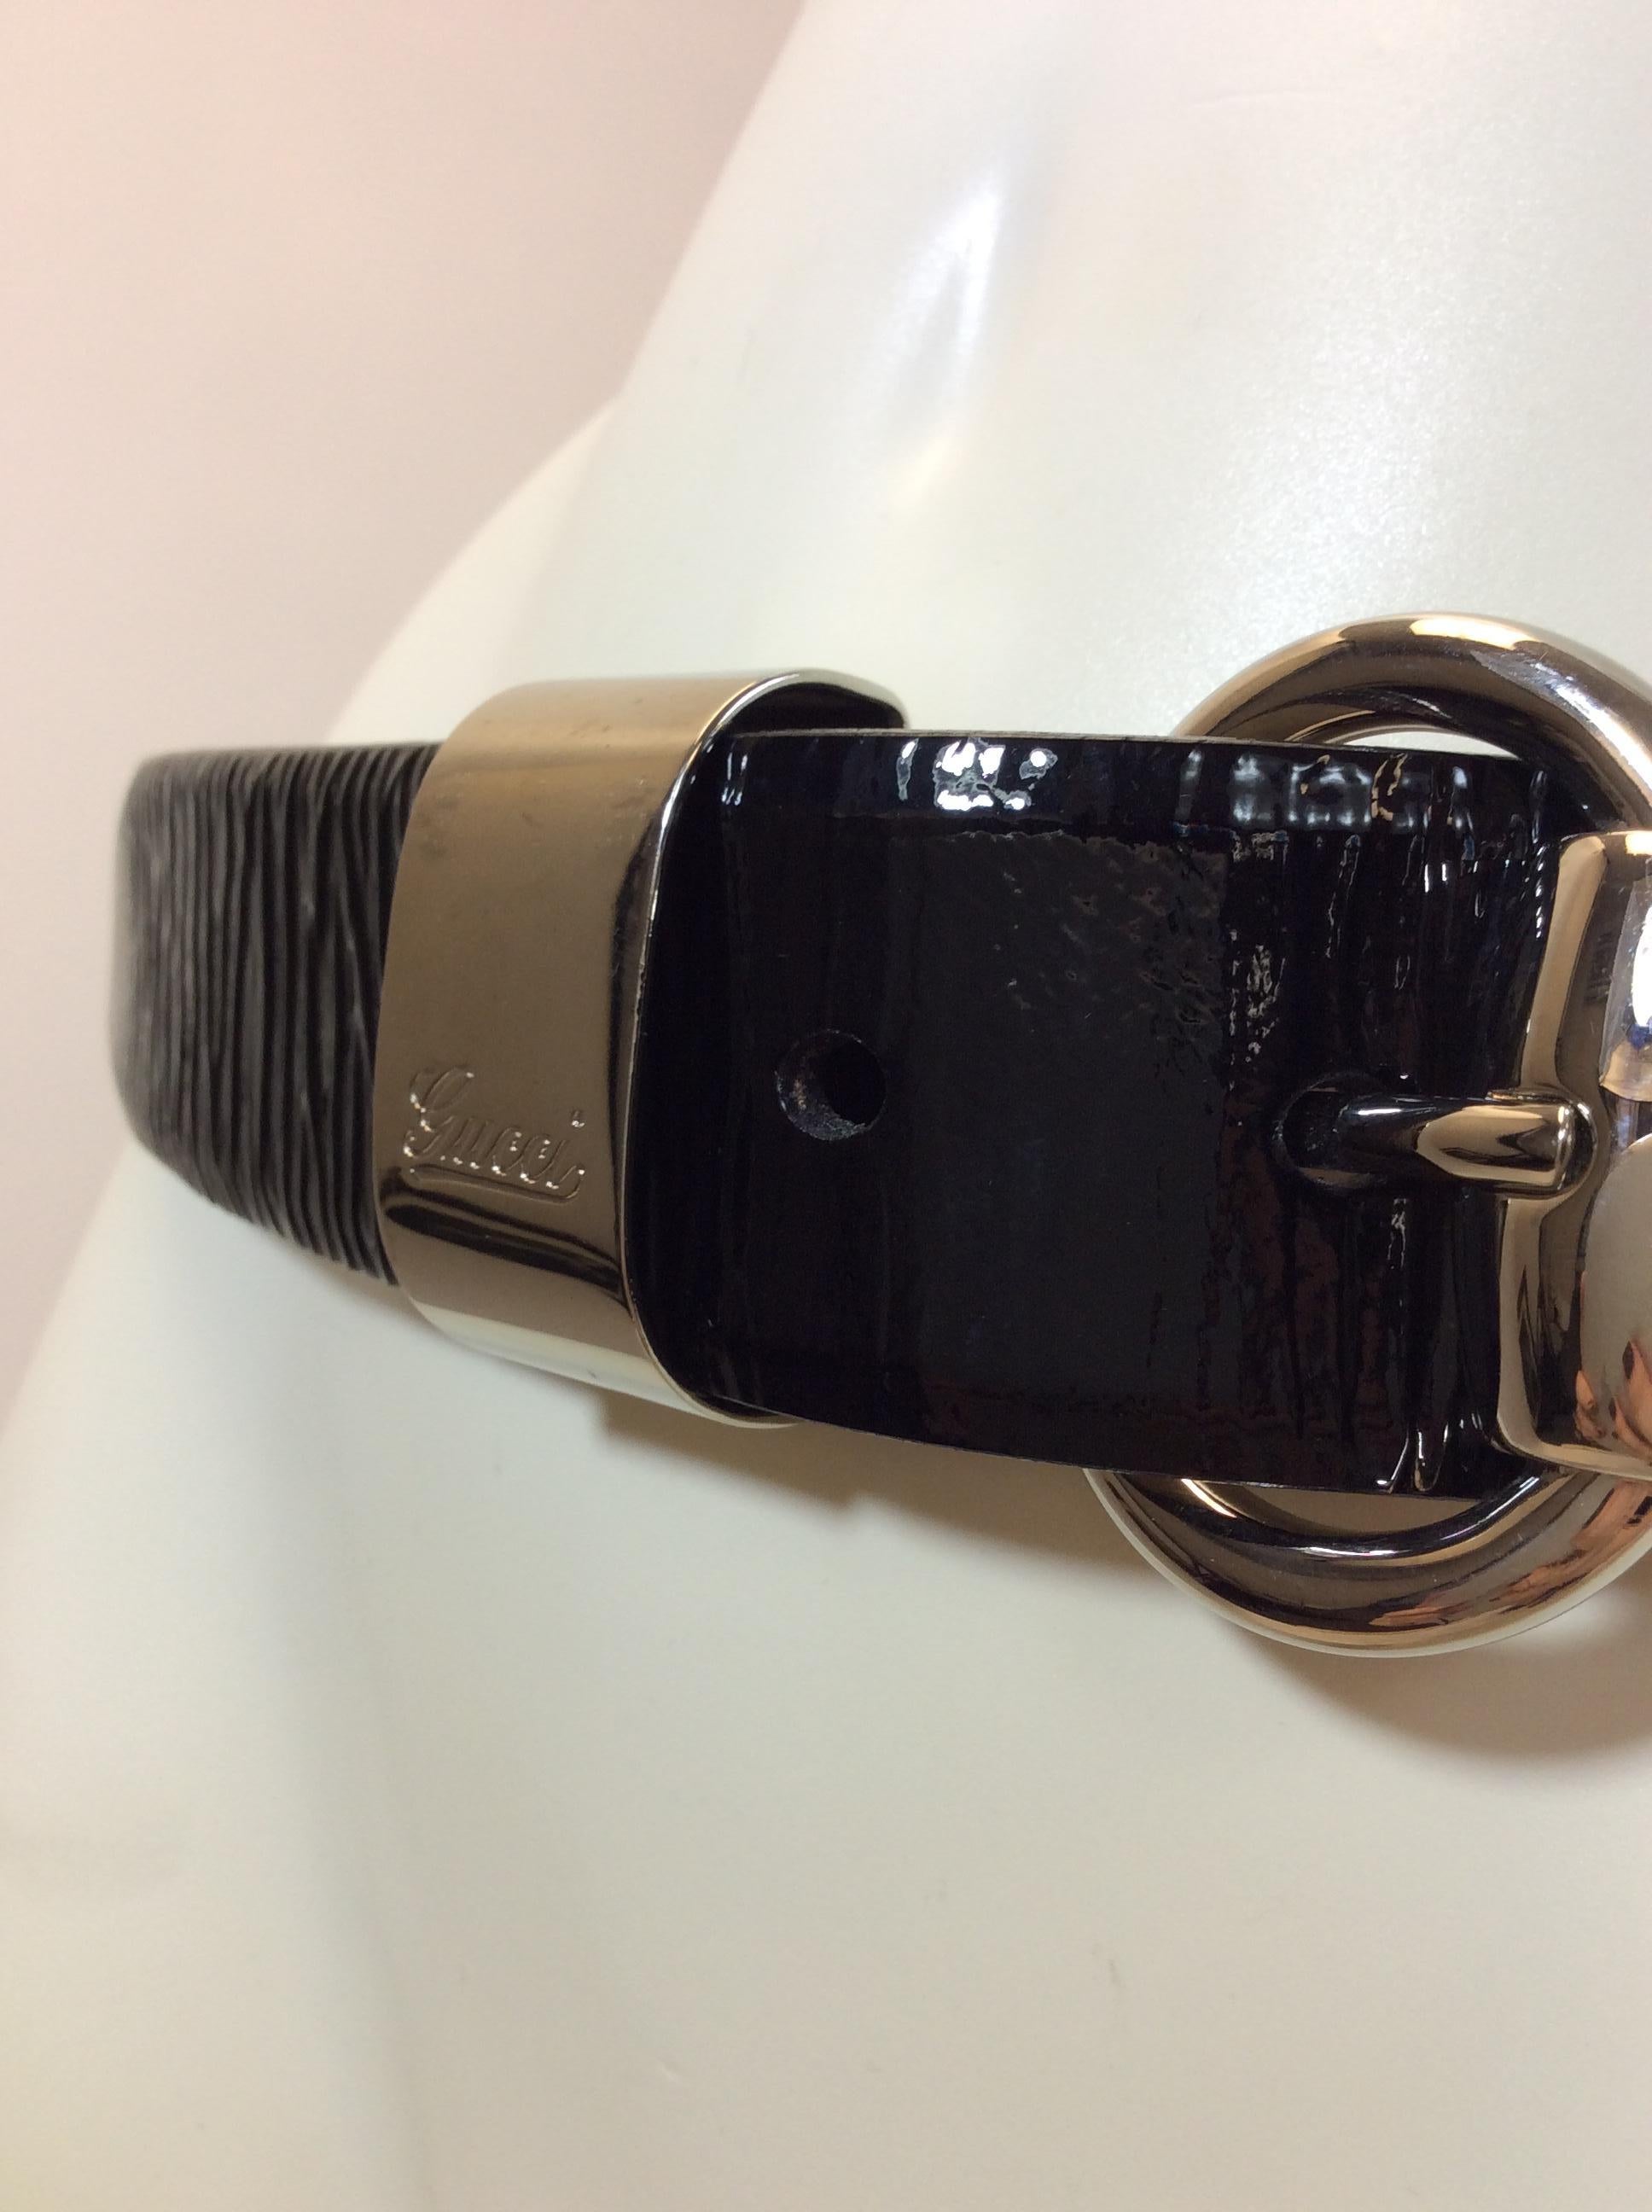 Gucci Black Patent Leather Belt with Silver Hardware In Good Condition For Sale In Narberth, PA